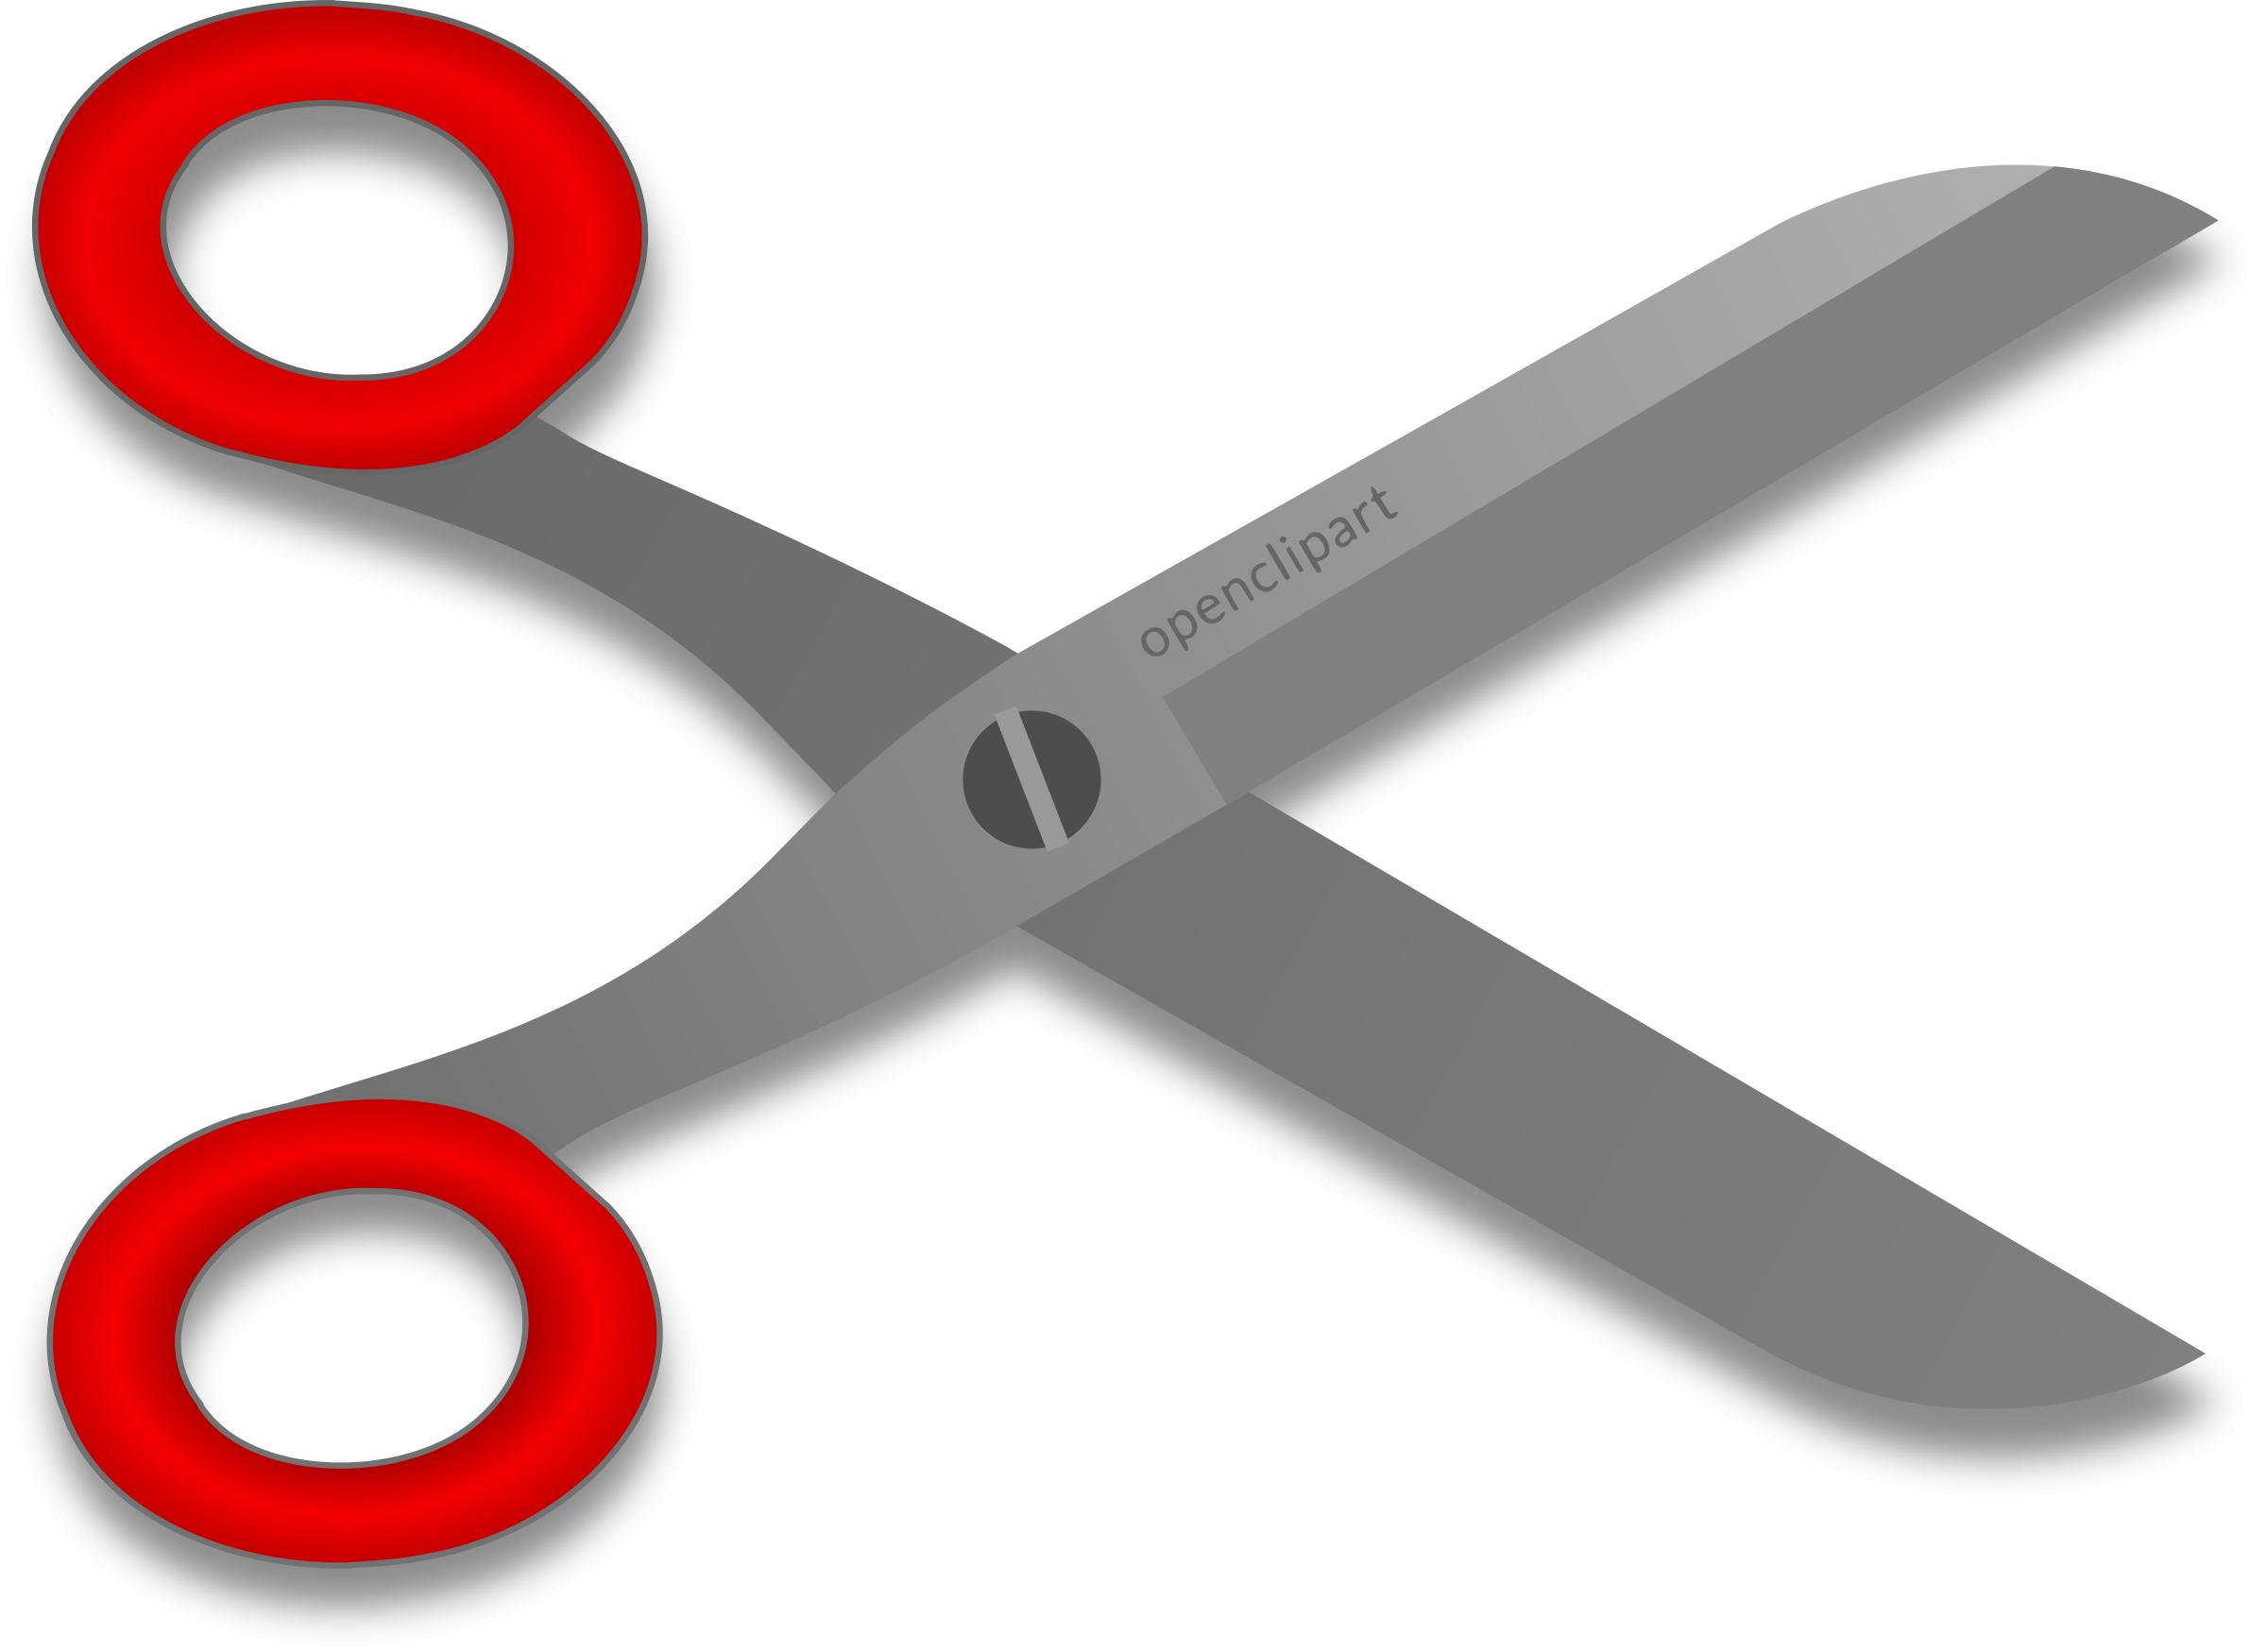 Openclipart Scissors with red ring PNG icons